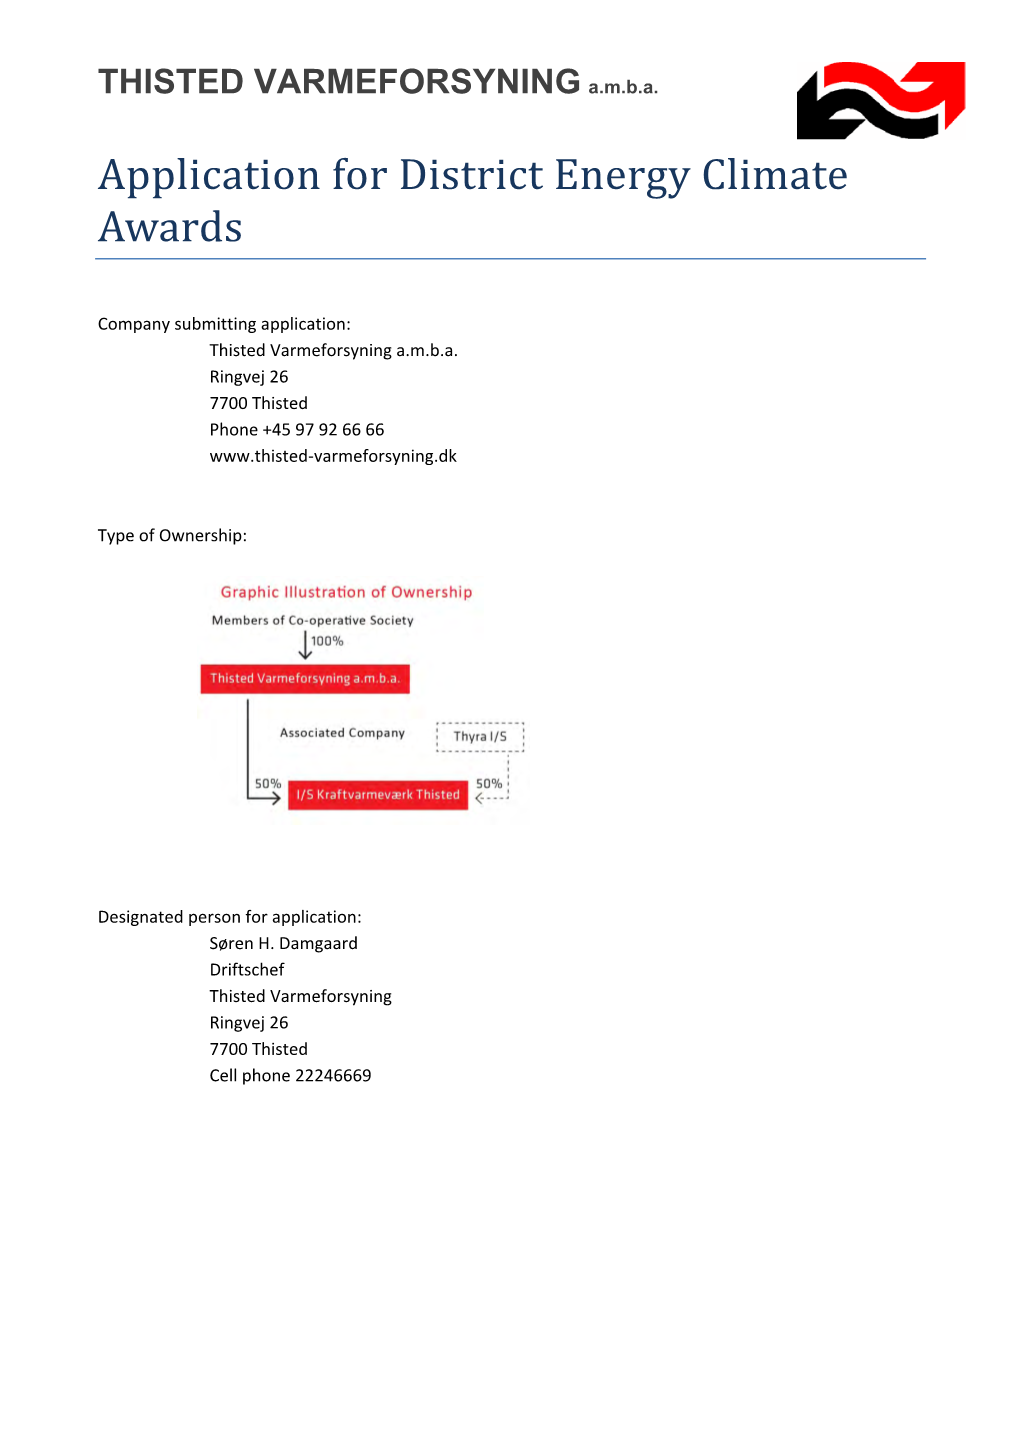 Application for District Energy Climate Awards